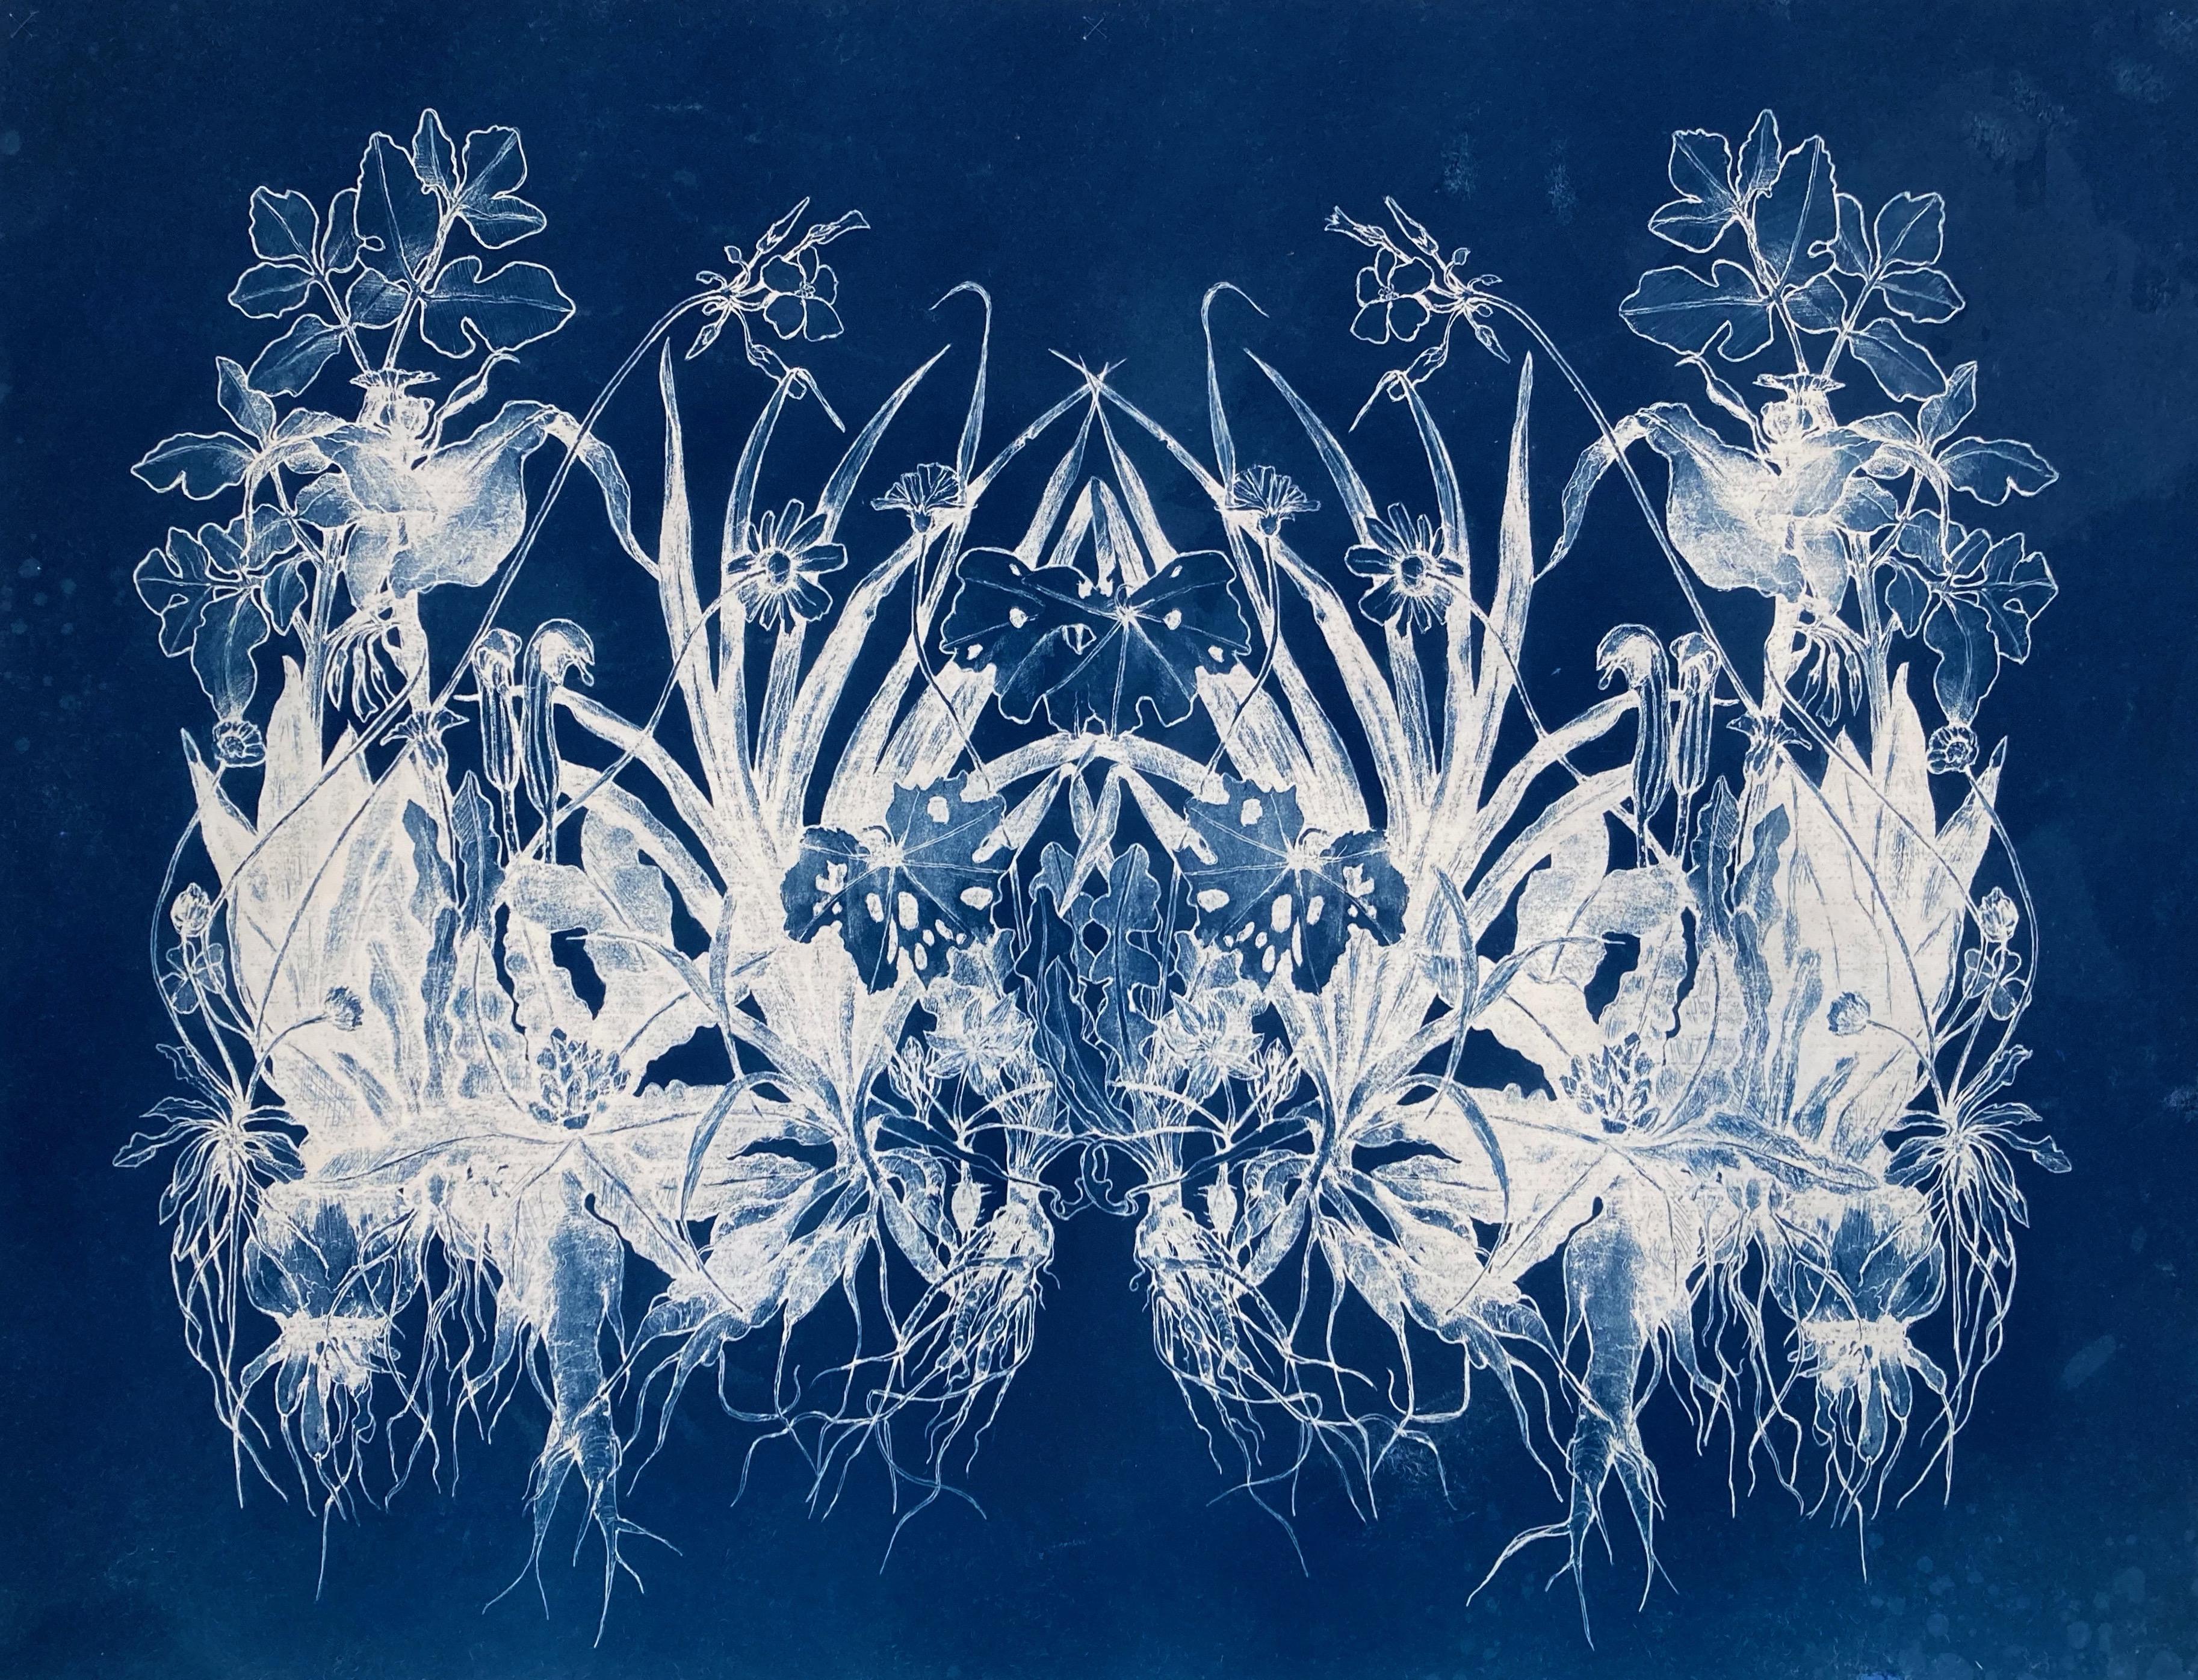 Judith Allen-Efstathiou Landscape Print - 'December Roots'     Realistic/Abstract Floral Pattern Photograph in Blue/White